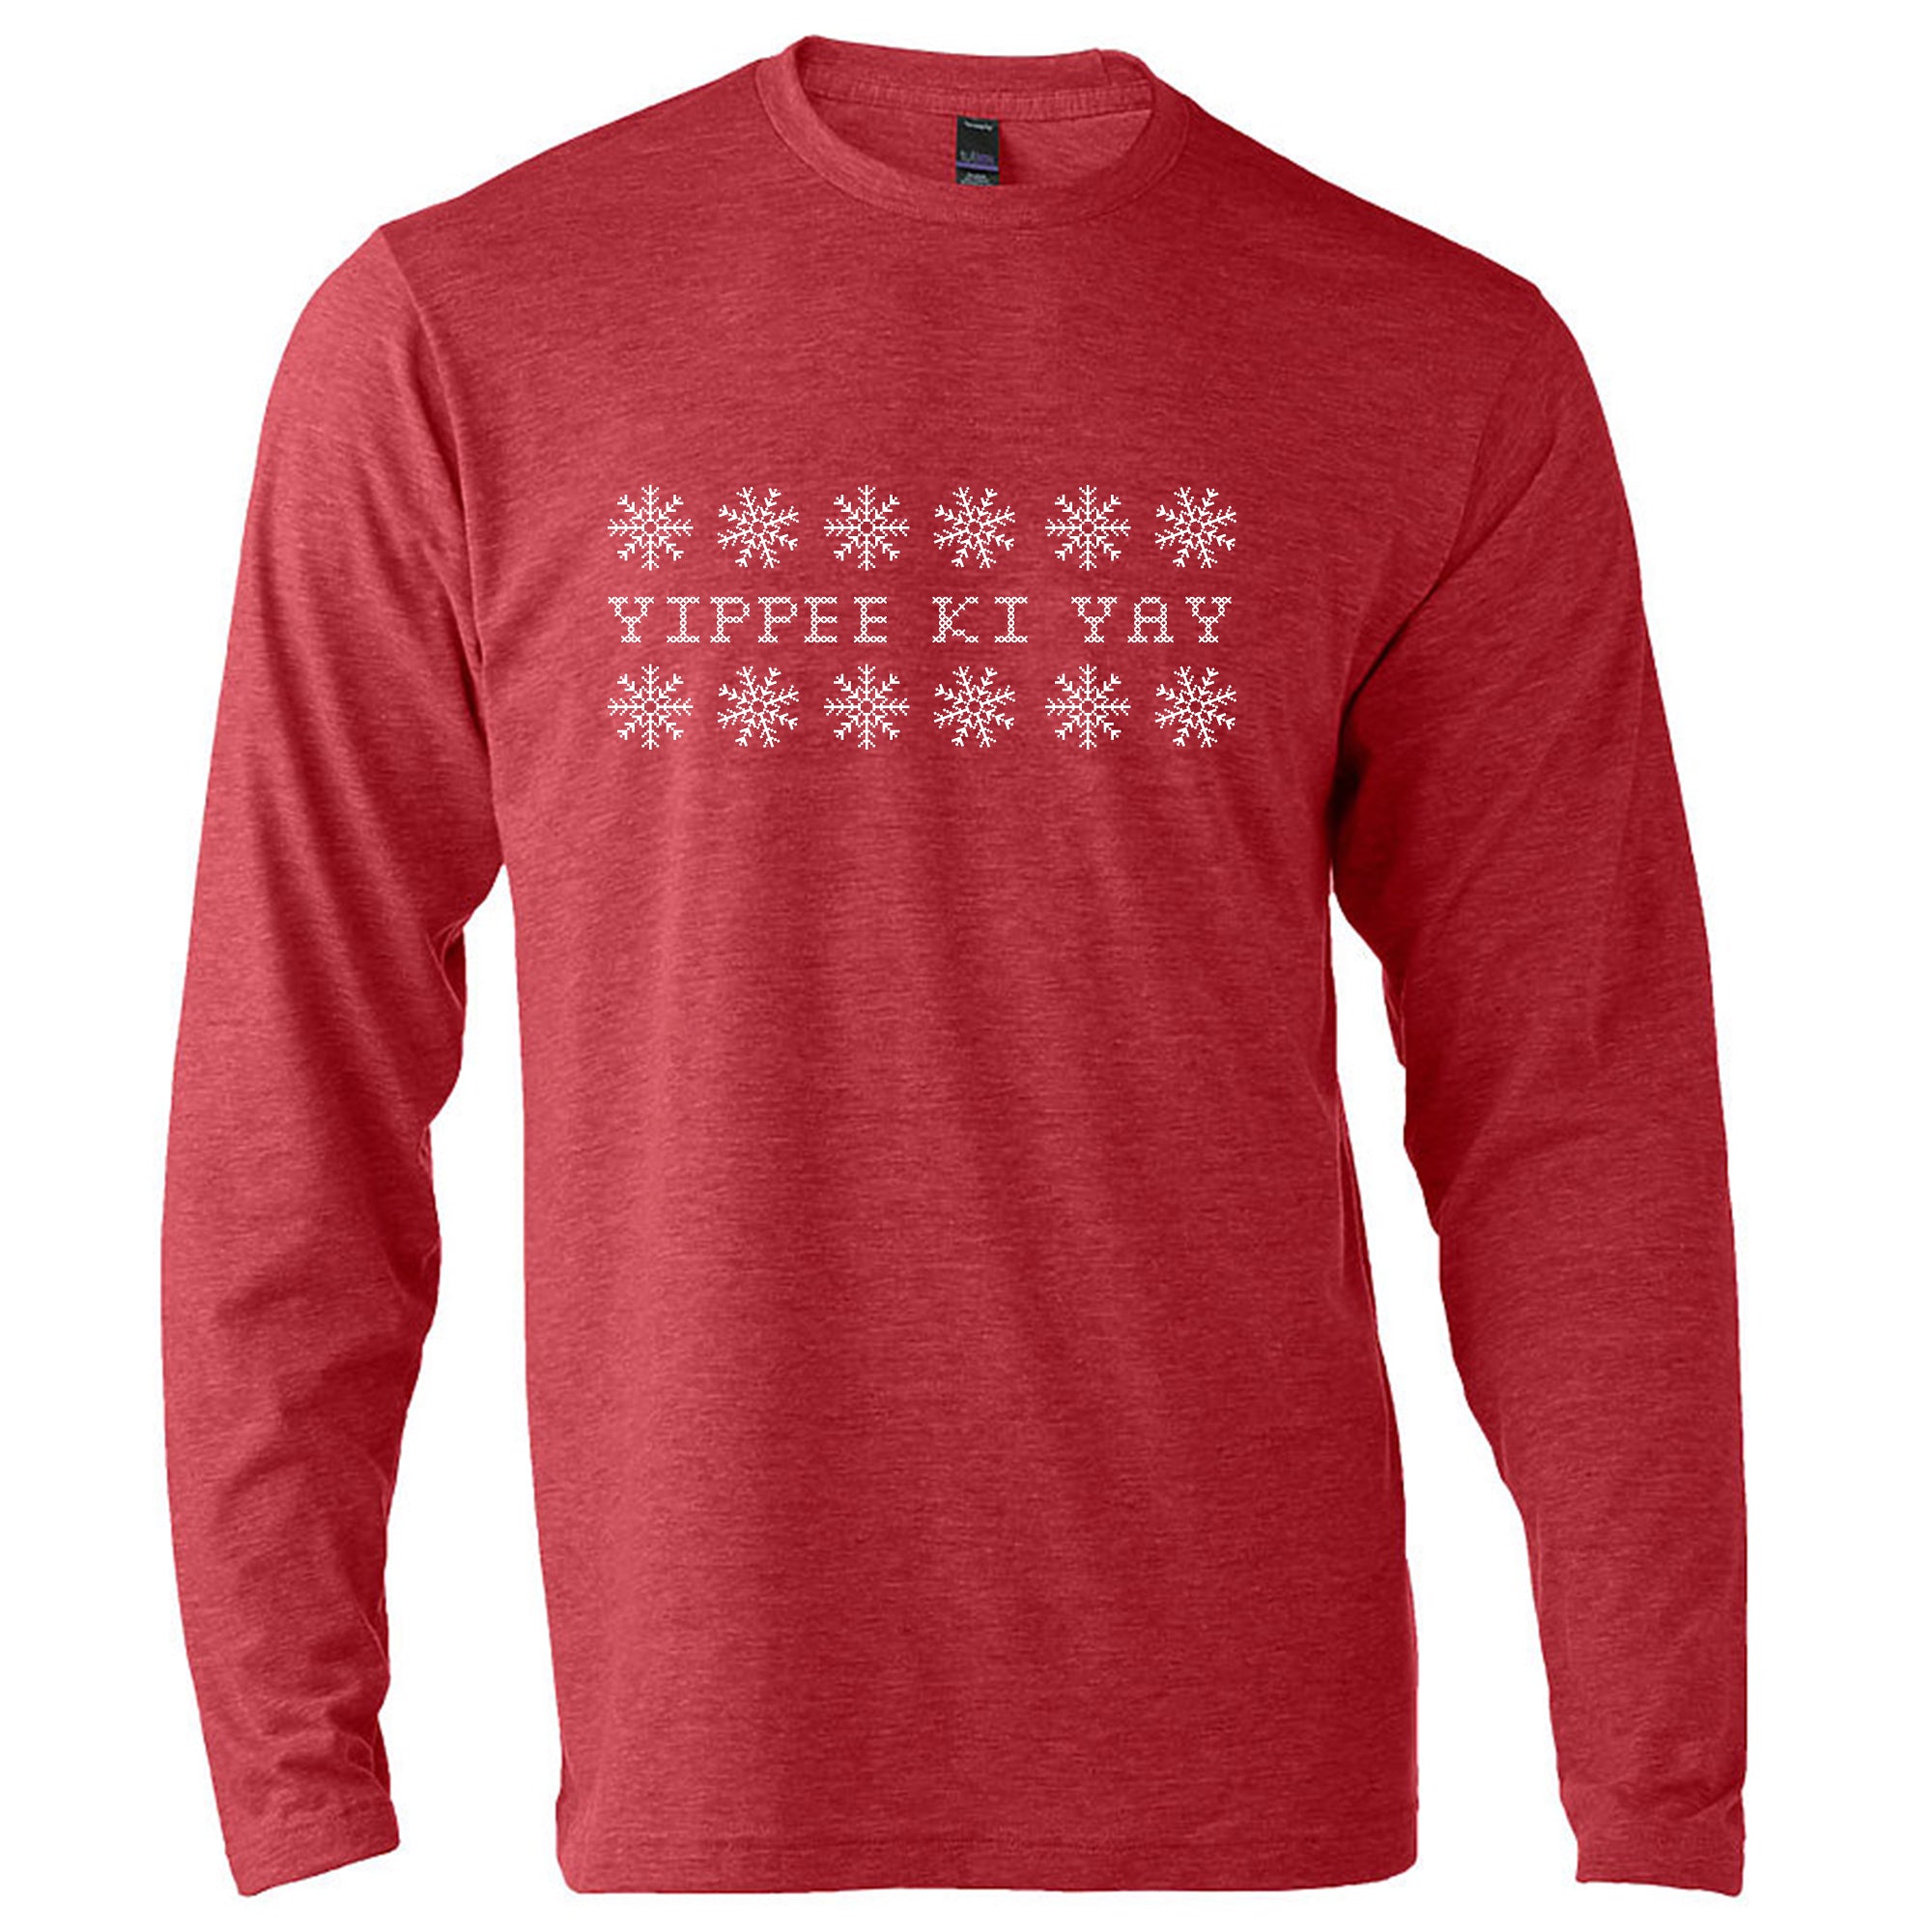 Yippee Holiday Edition : Choose your style